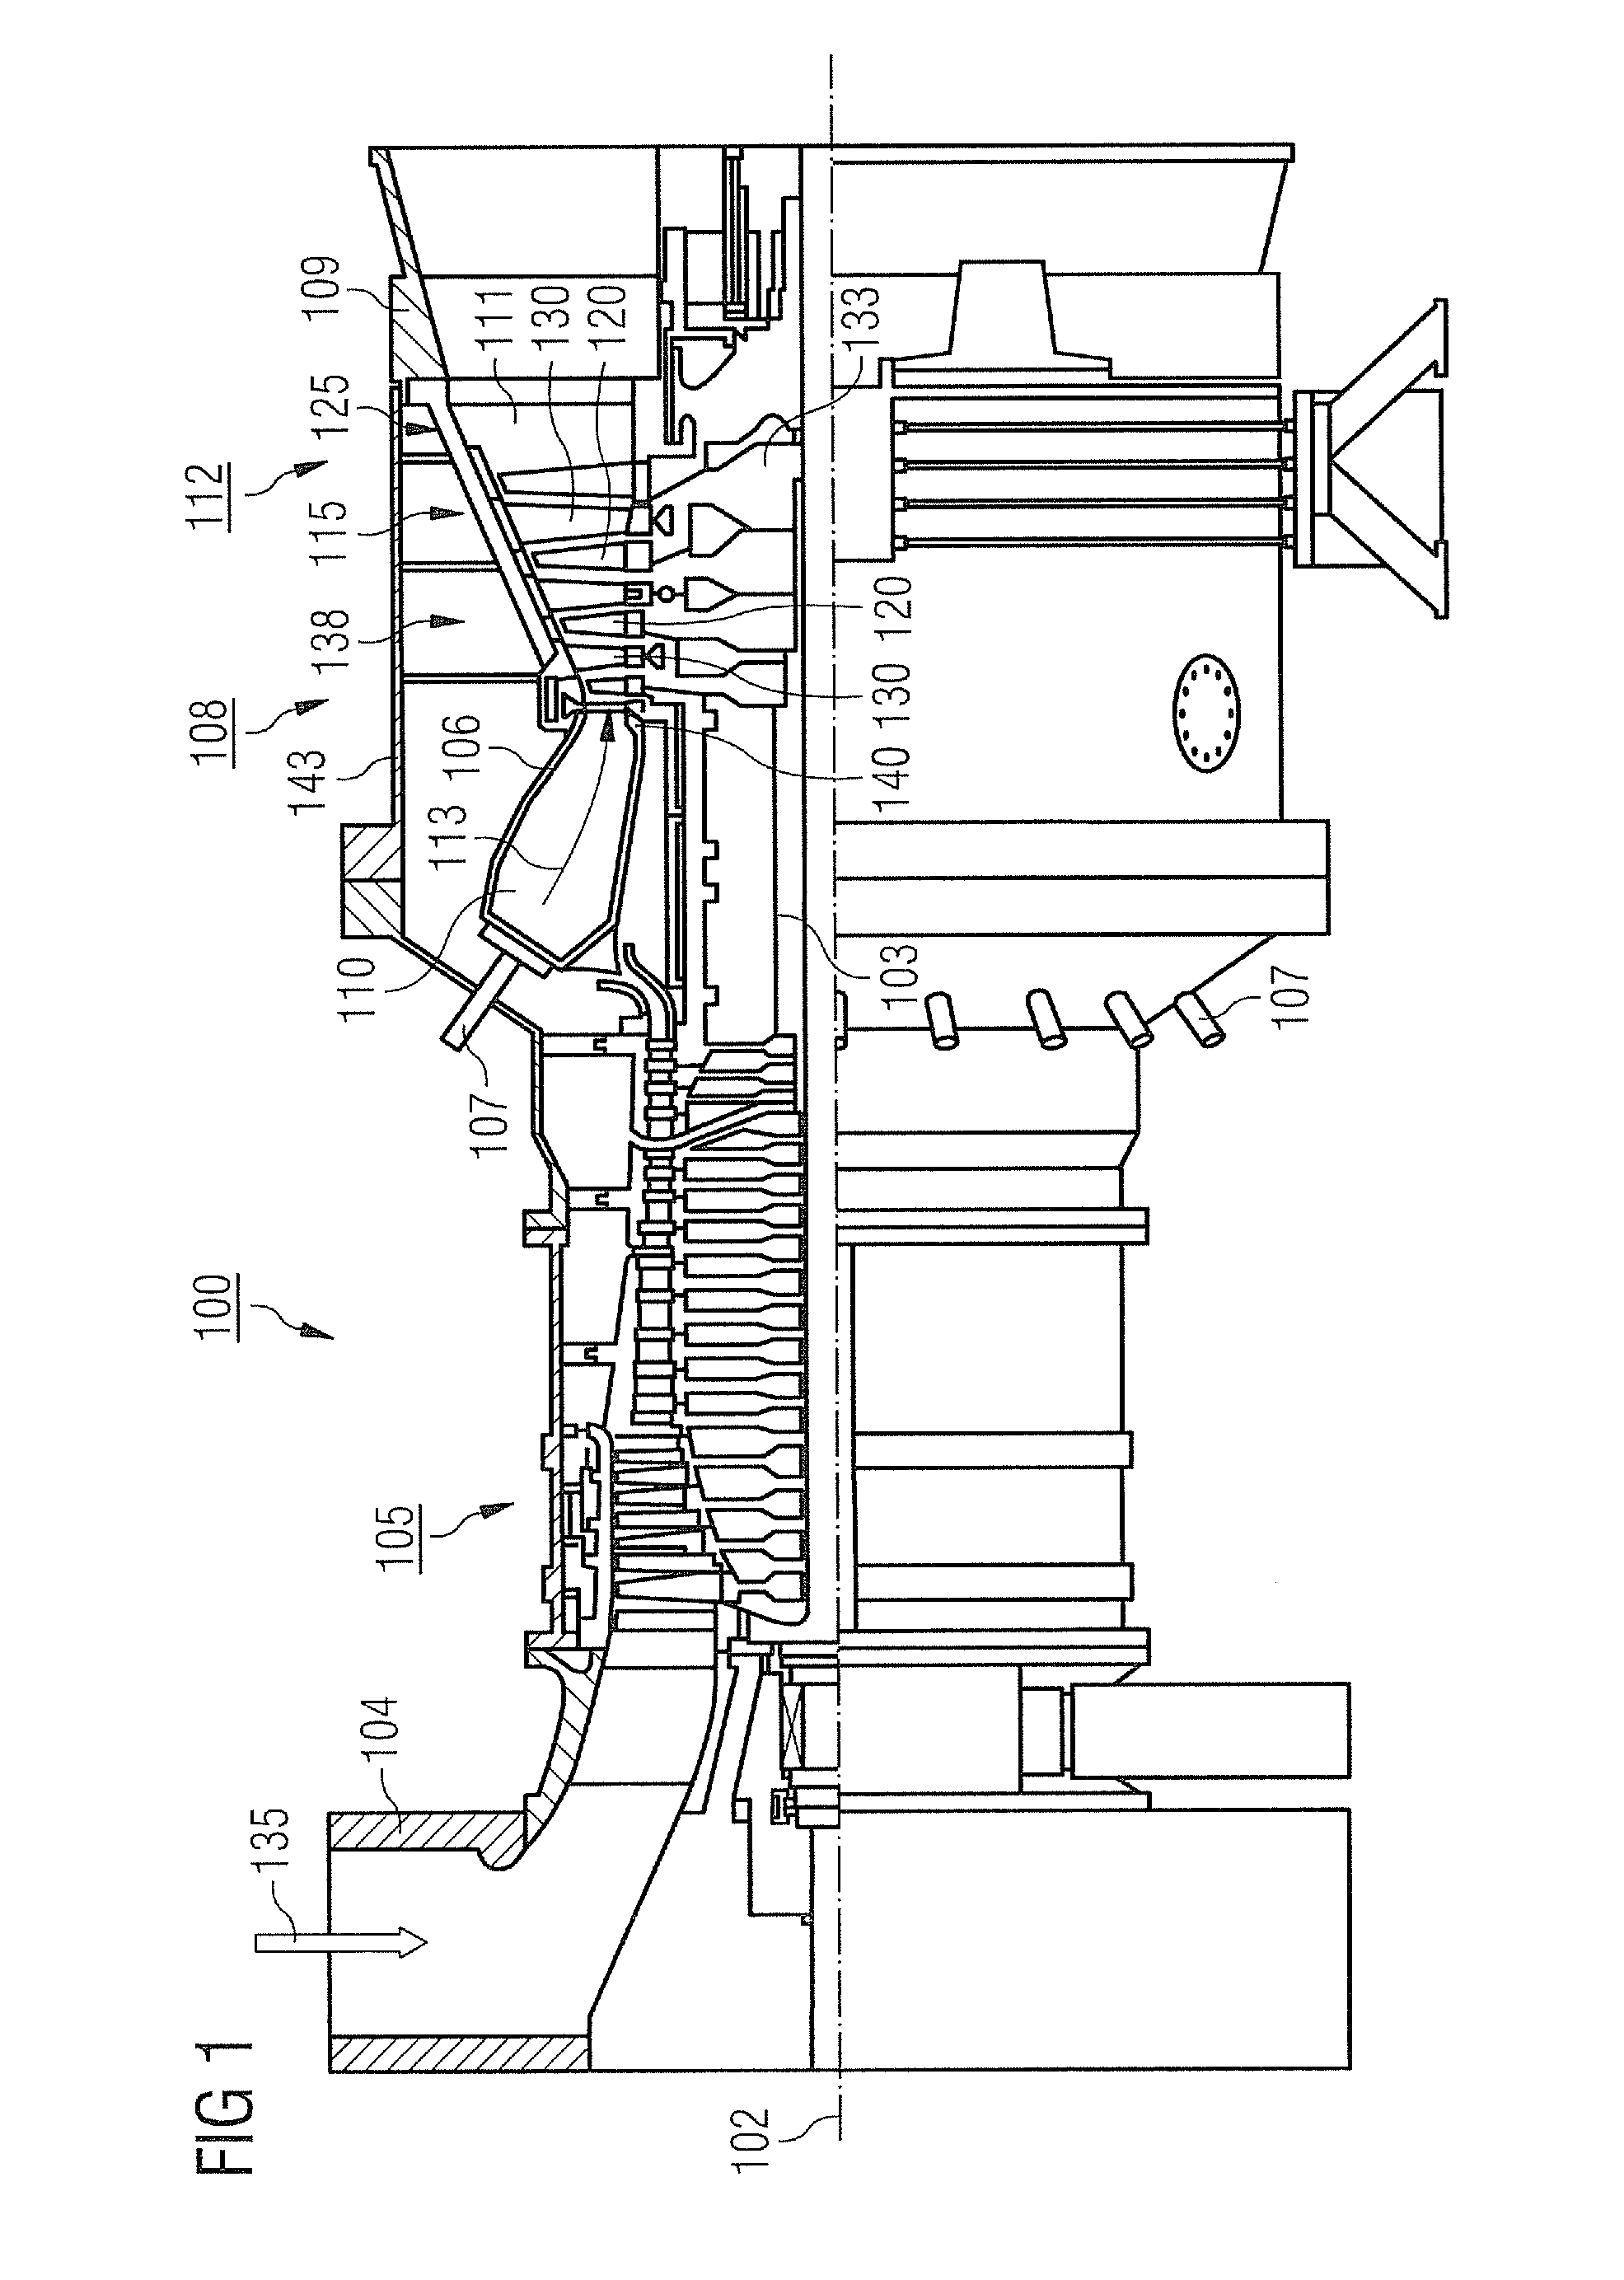 Method for welding workpieces made of highly heat-resistant superalloys, including a particular mass feed rate of the welding filler material